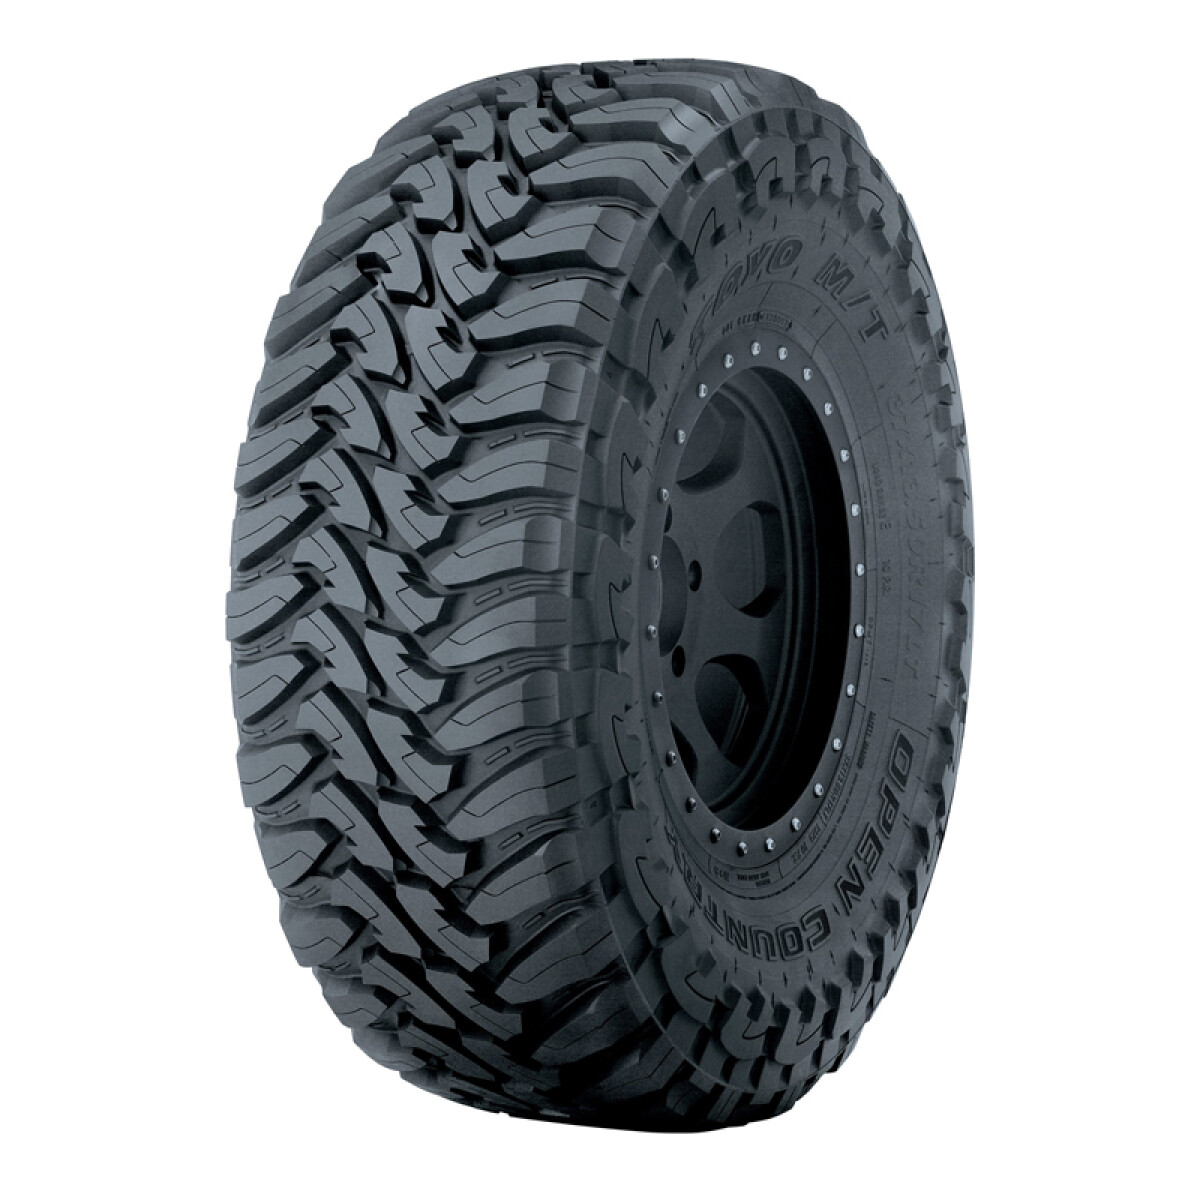 CUBIERTA NEUMATICO TOYO OPEN COUNTRY AT+ 215/65R16 98H 